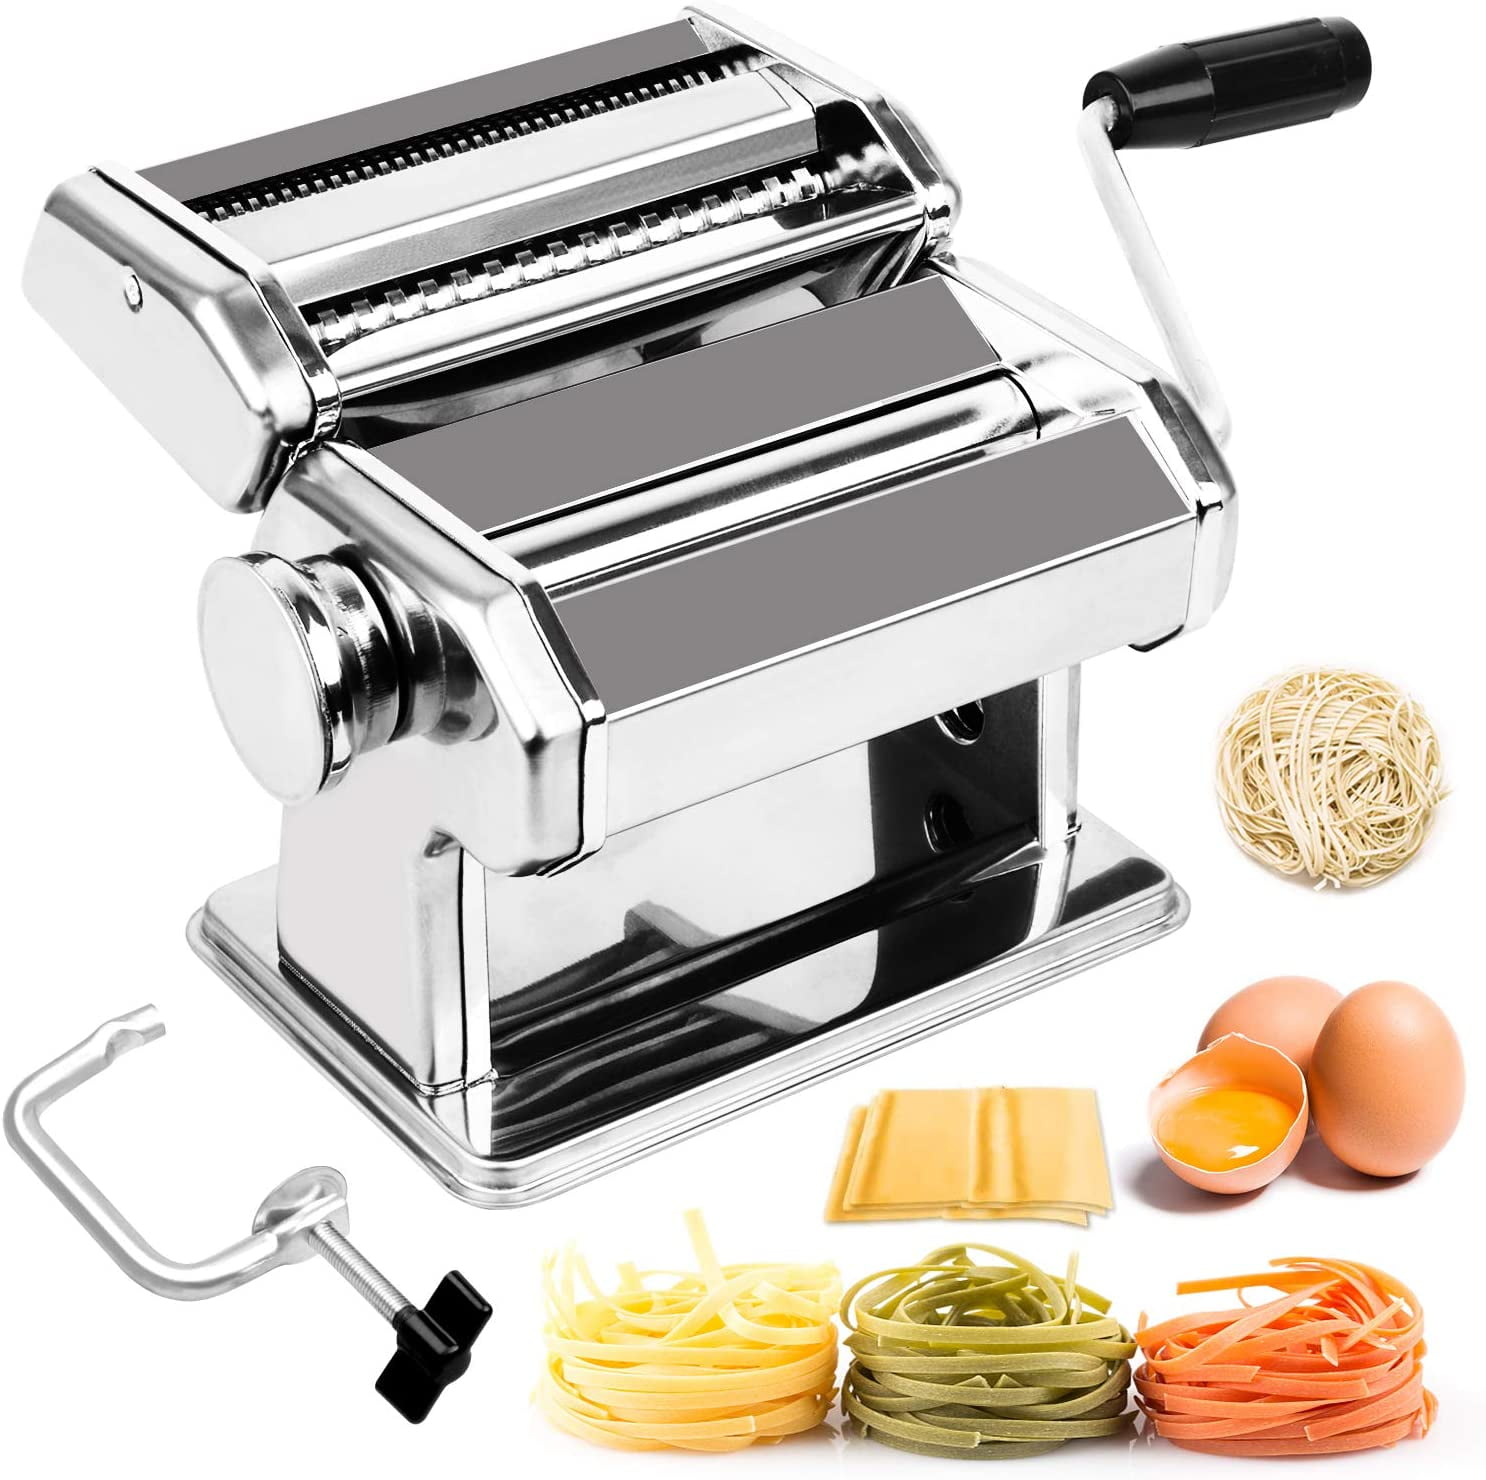 Pasta Machine and Hand Crank 2 Size Stainless Cutter 150 Roller Manual Noodles Makers with 7 Adjustable Thickness Setting Perfect for Homemade Spaghetti Lasagna or Dumpling Skins Clamp 